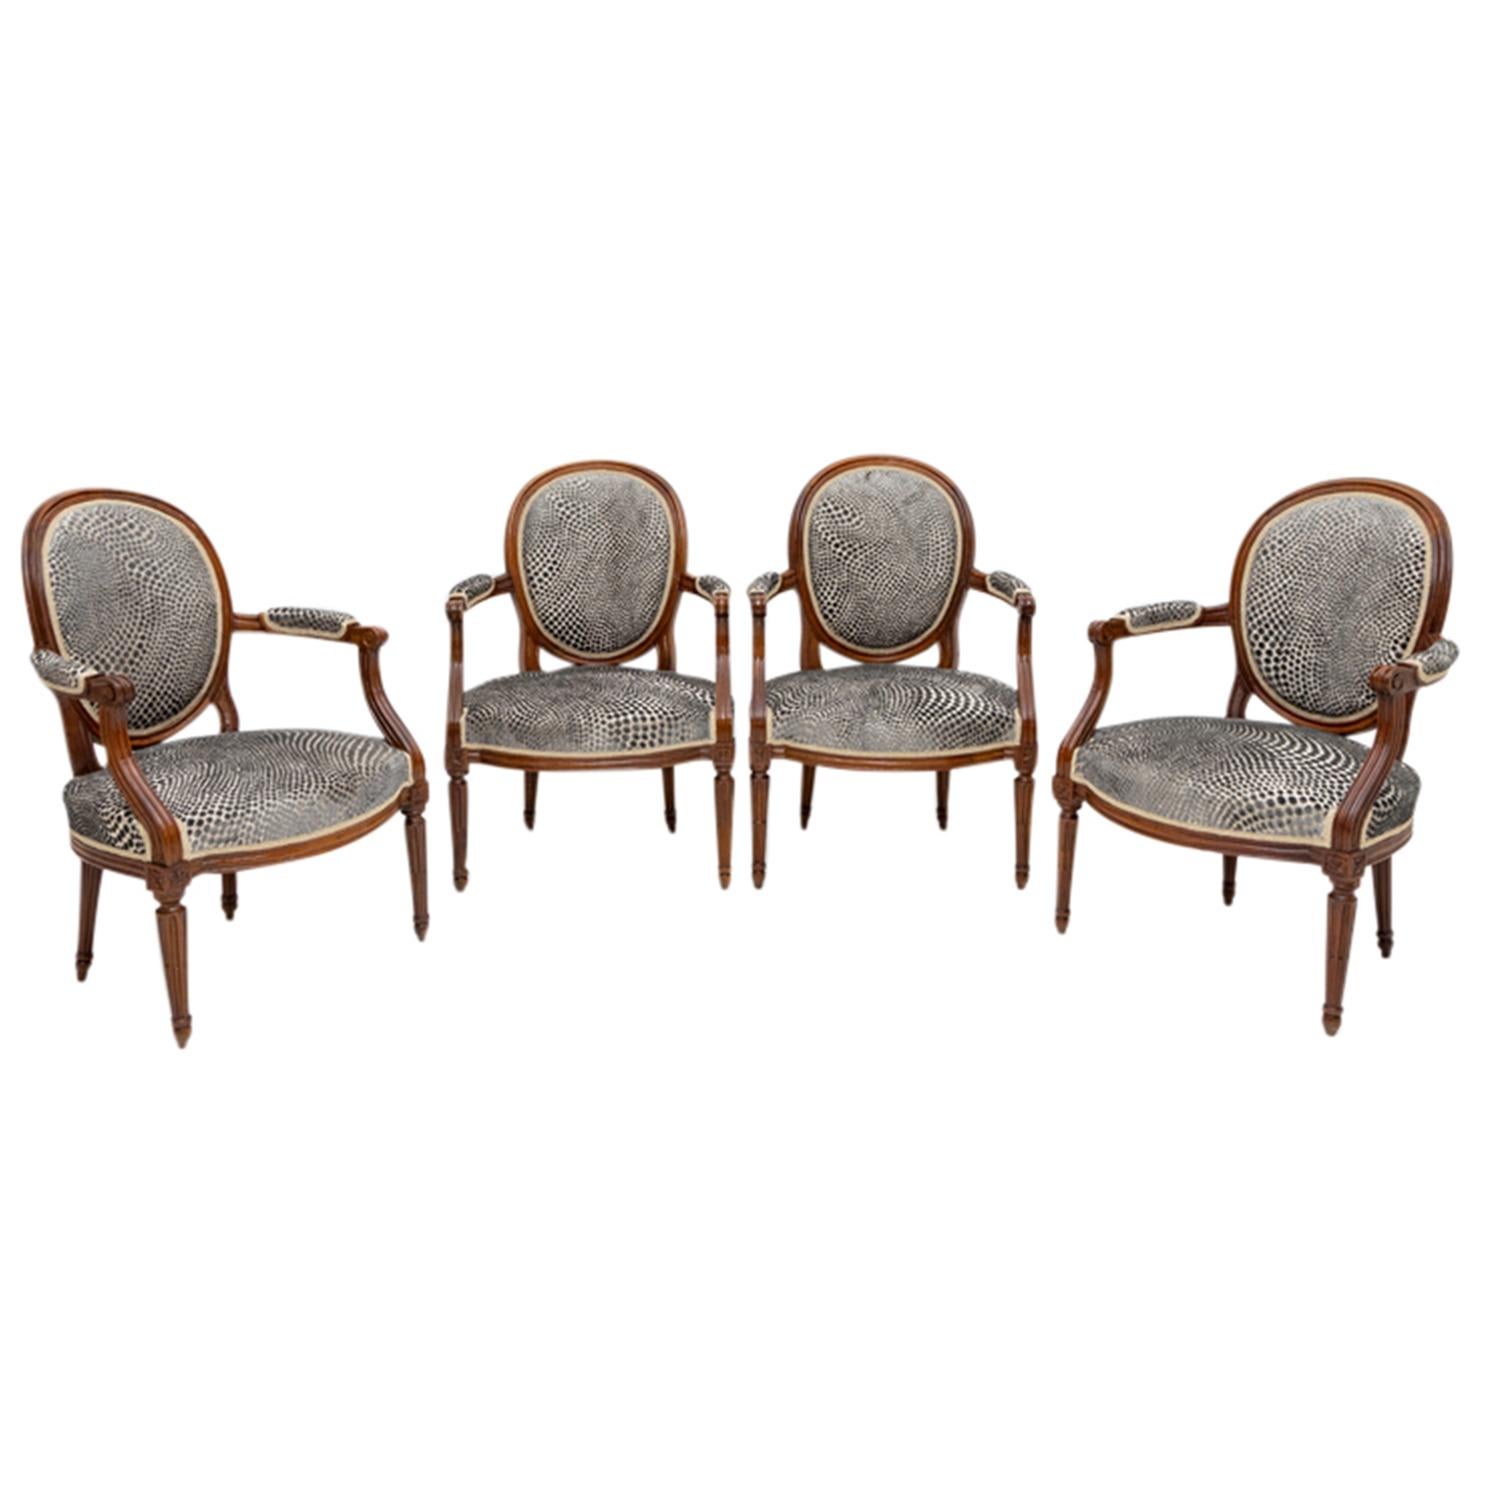 A late 18th Century, antique French set of four Medallion dining room armchairs made of hand crafted polished, lacquered Beechwood in good condition. The Parisian polished cocktail chairs have an inclined backrest, detailed with slim upholstered